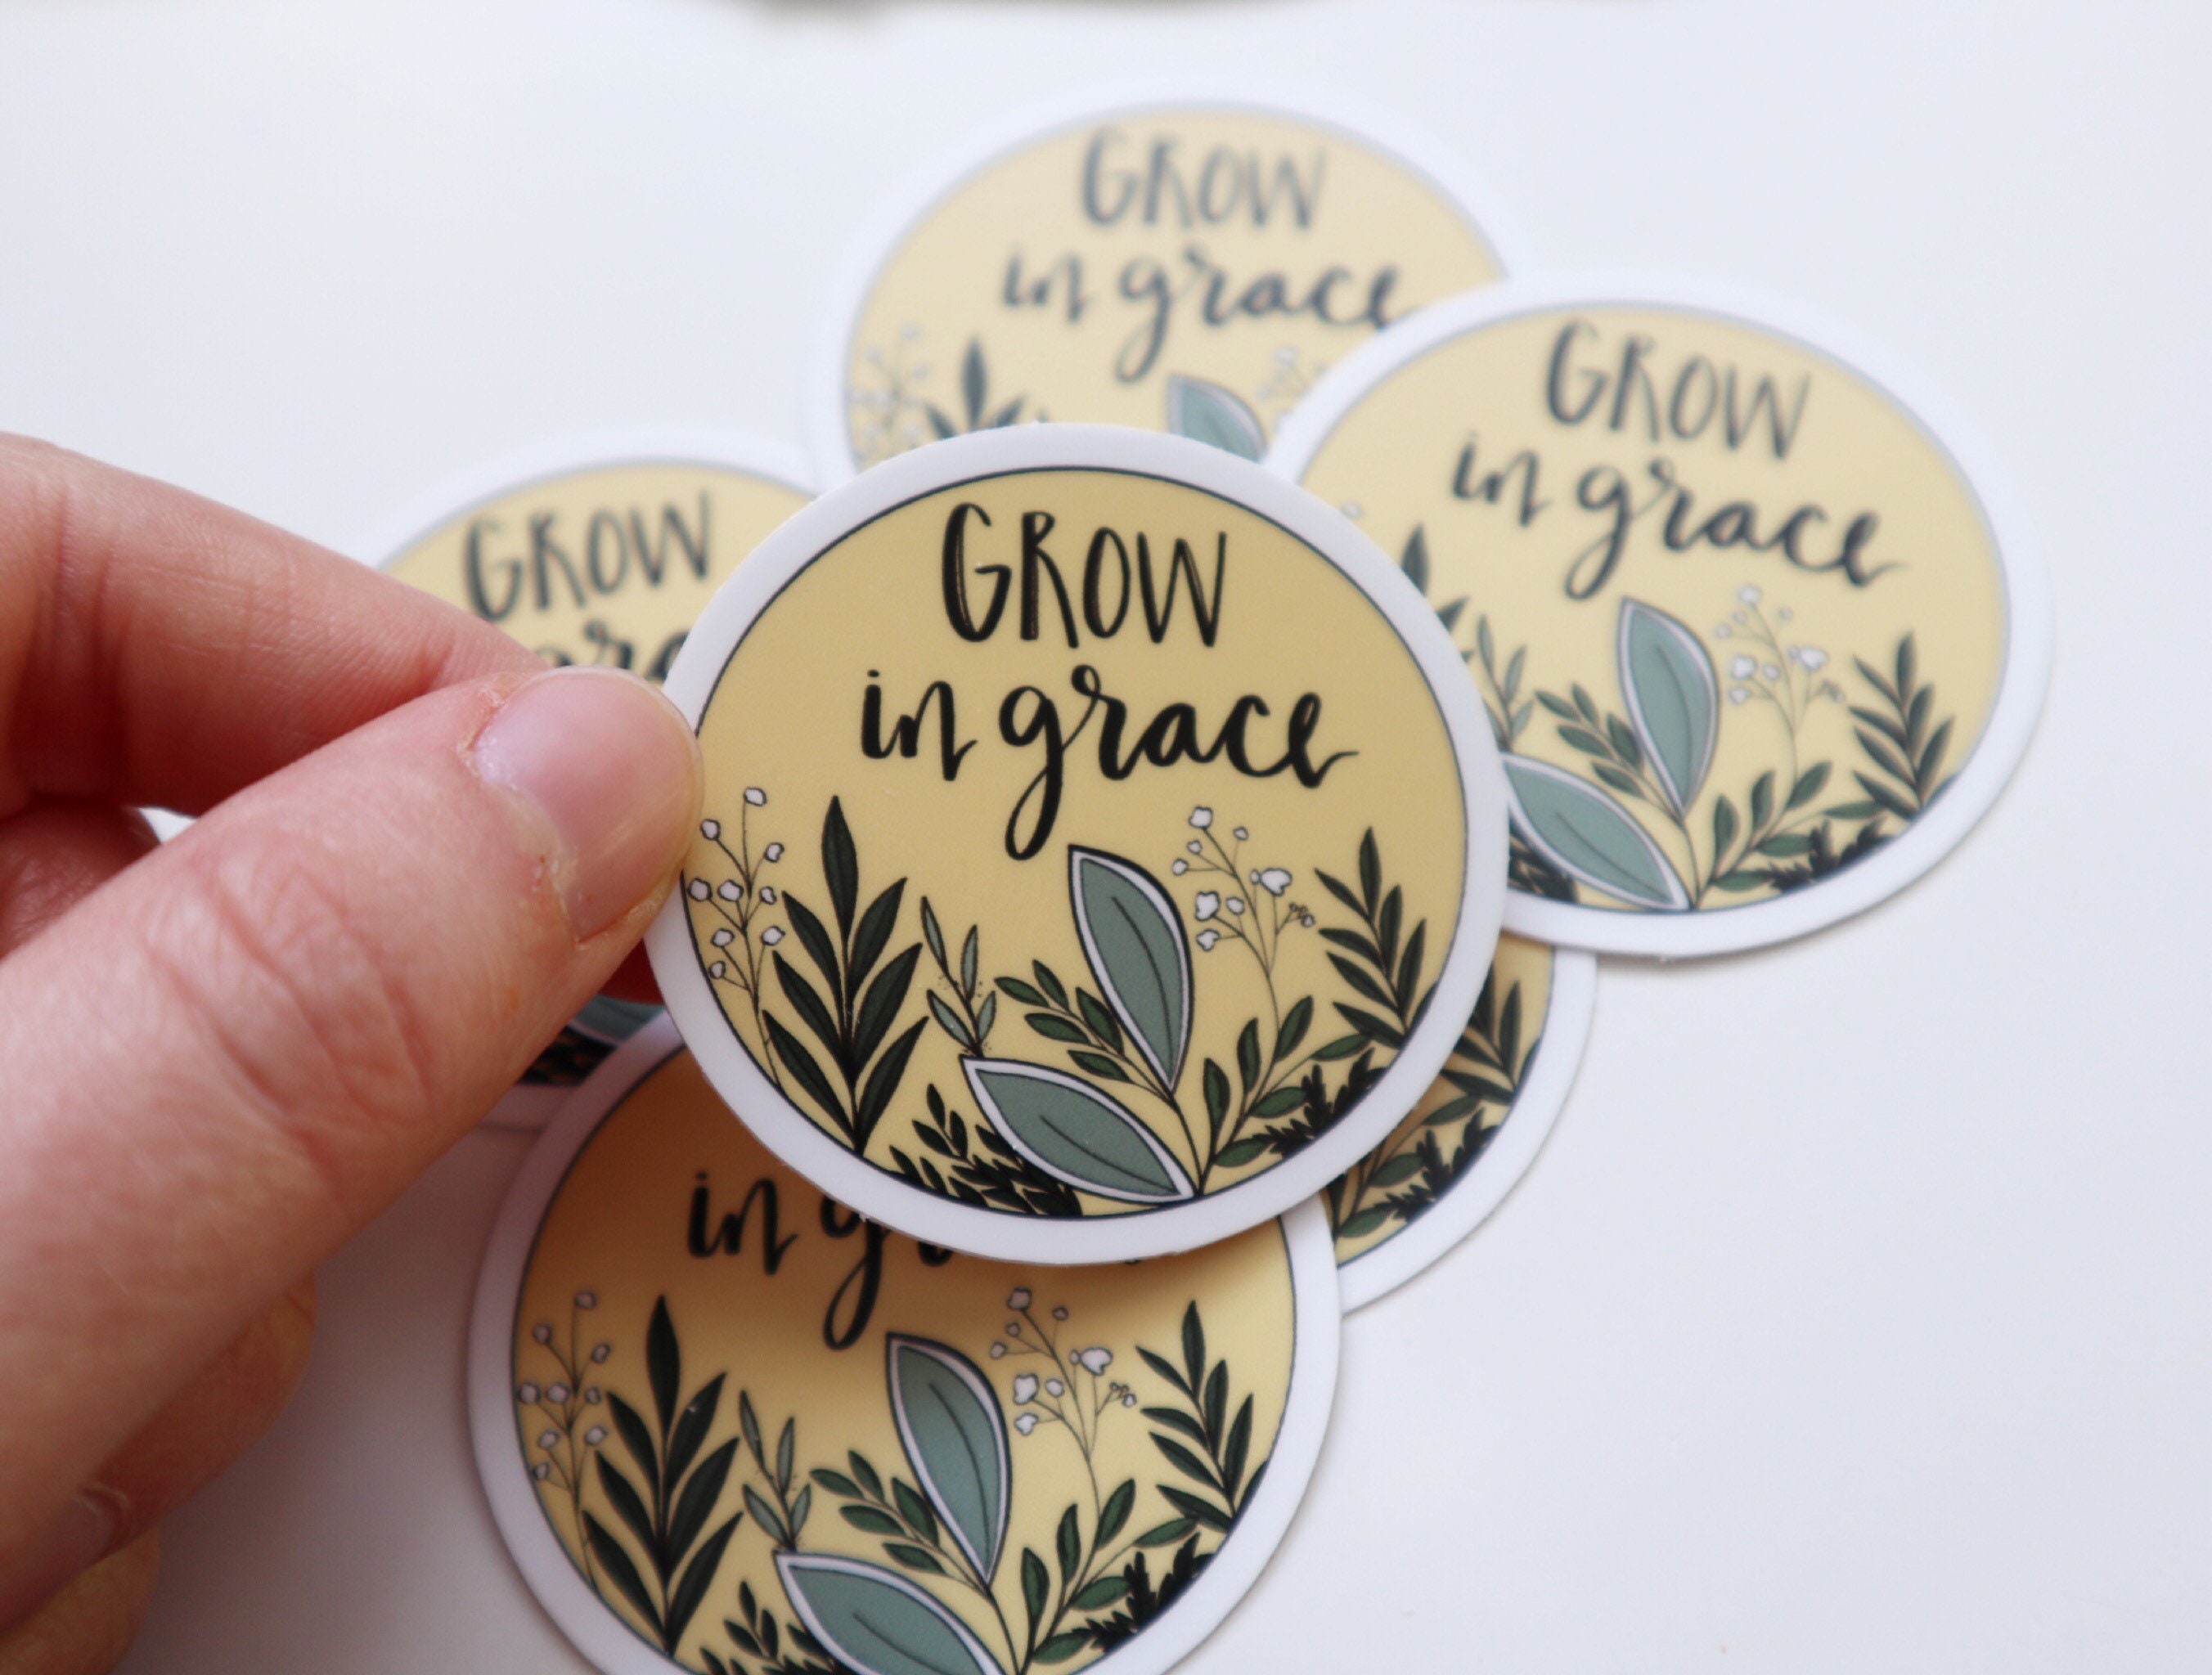 Christian stickers Hydro Flask sticker Free Shipping Faith Based Laptop sticker Grow in Grace sticker Waterproof UV Protected